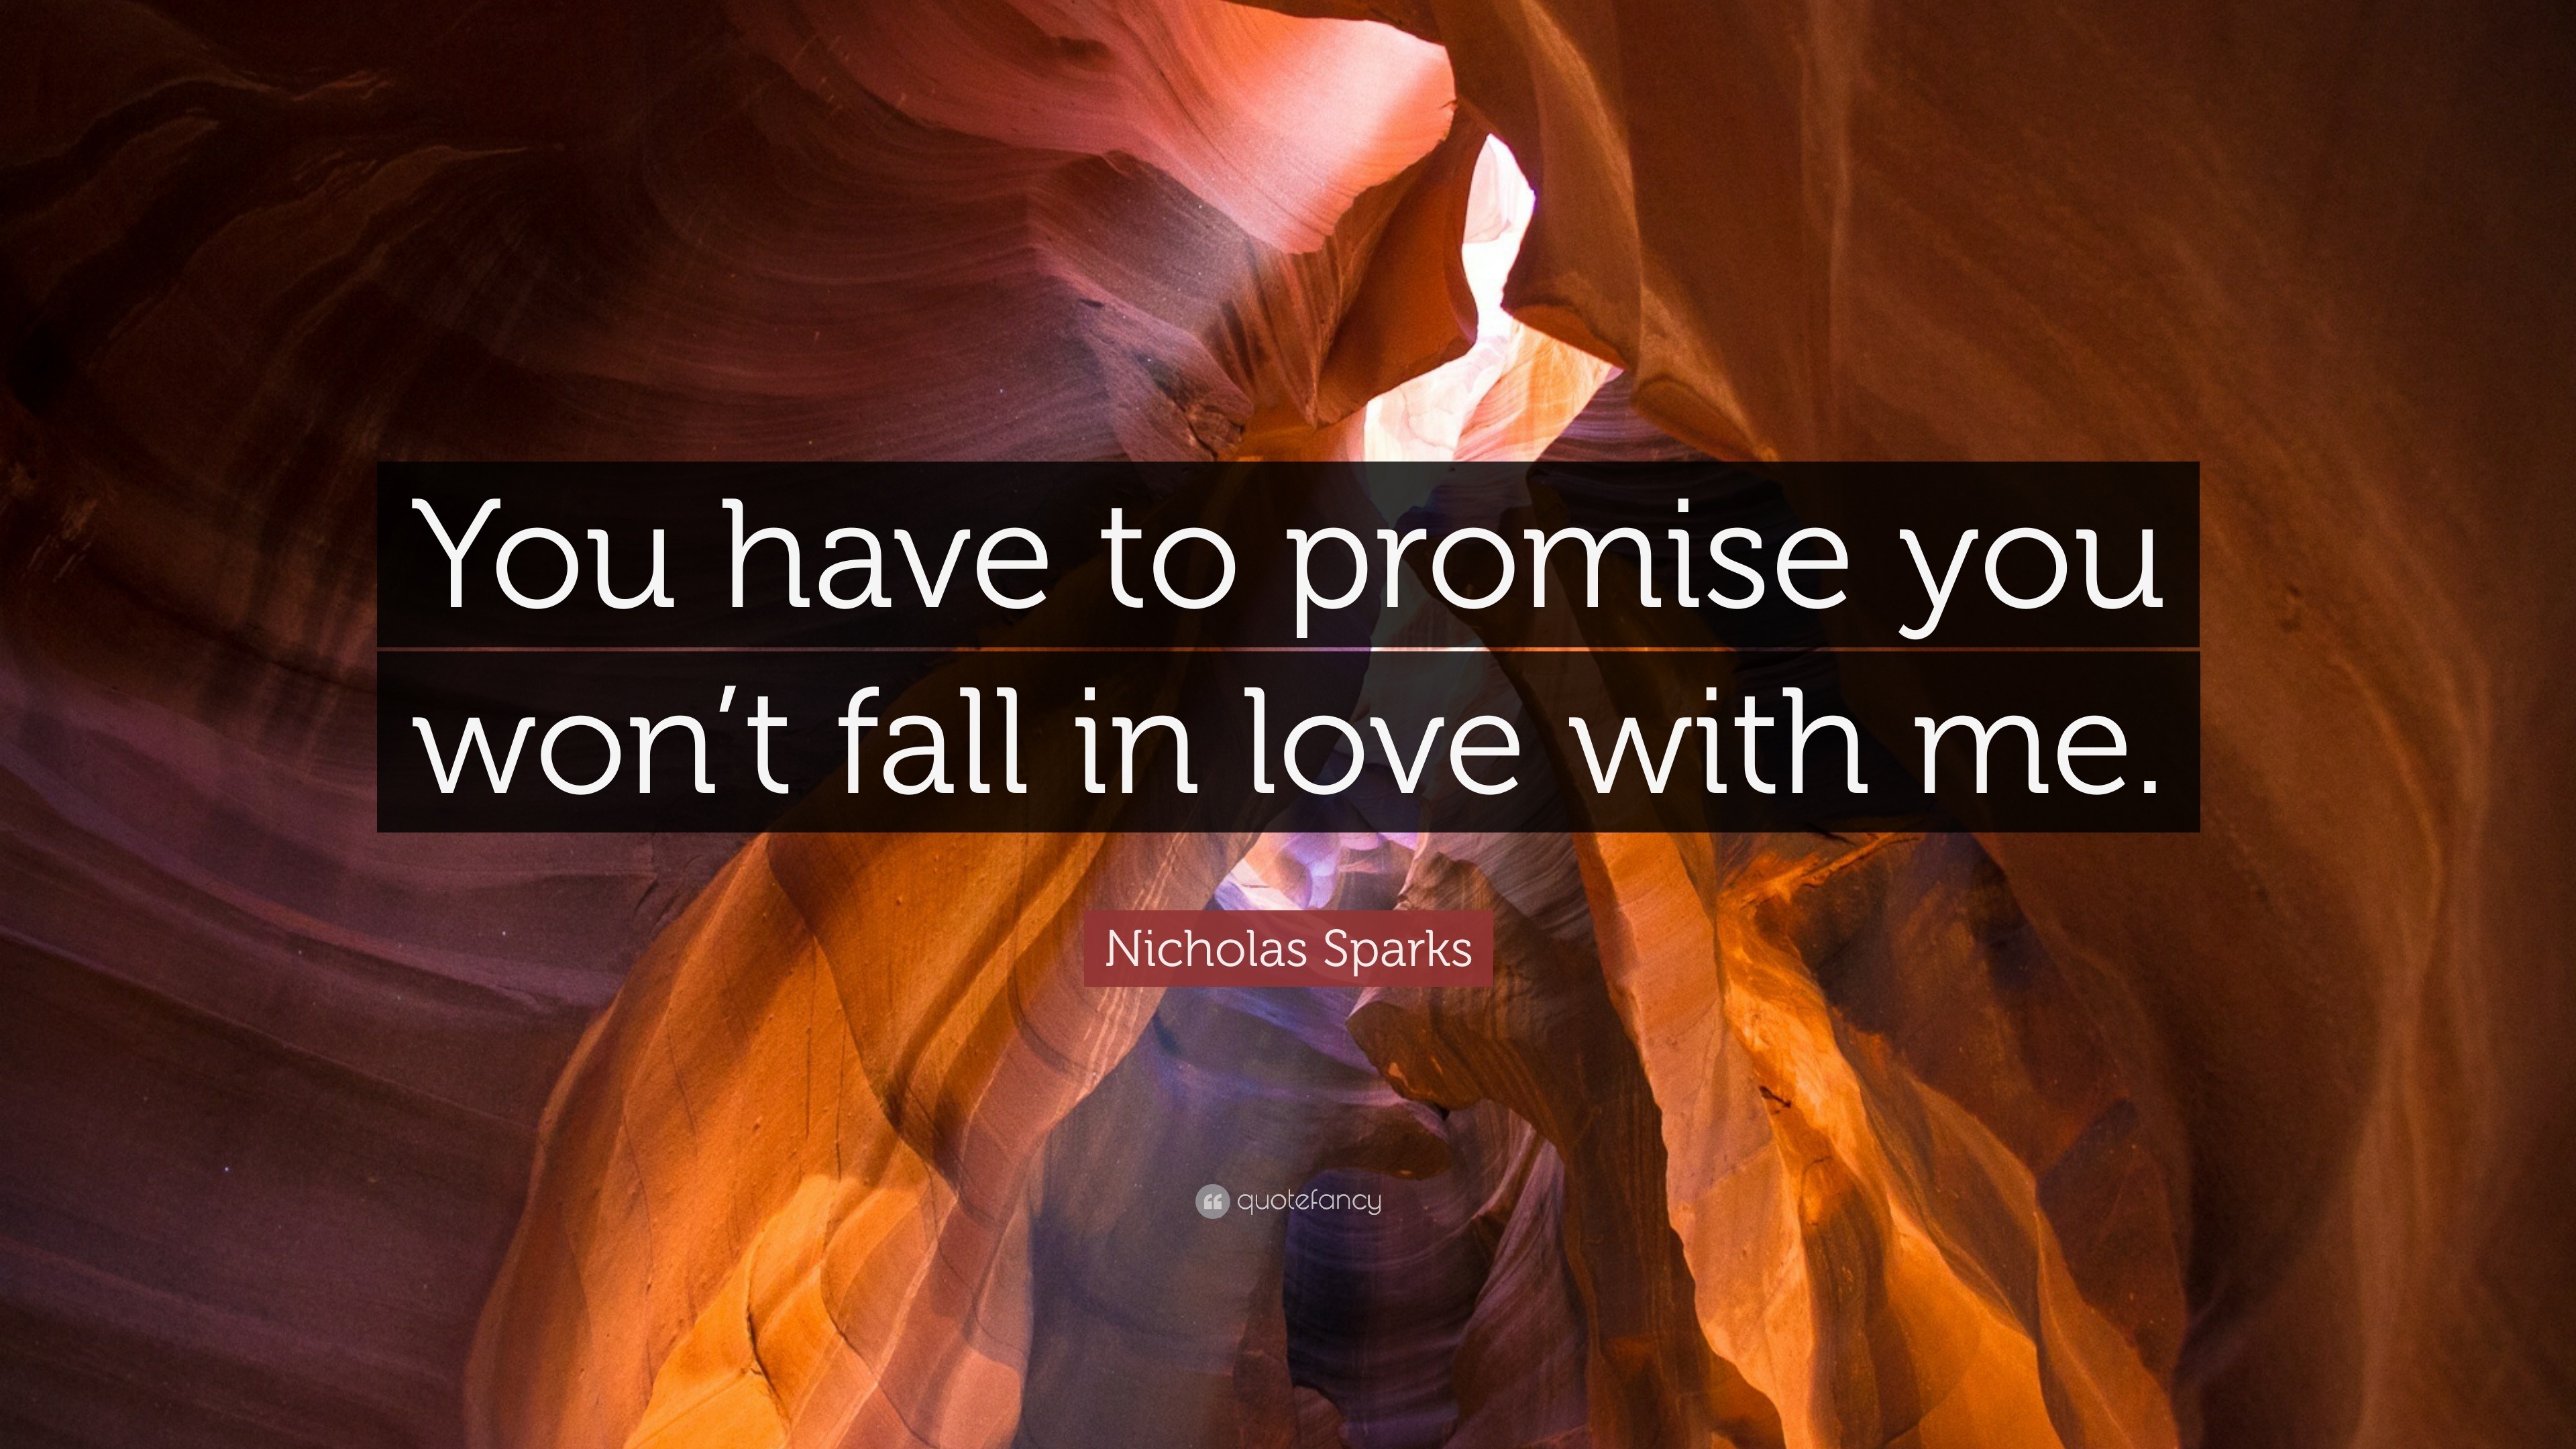 Nicholas Sparks Quote You Have To Promise You Won T Fall In Love With Me